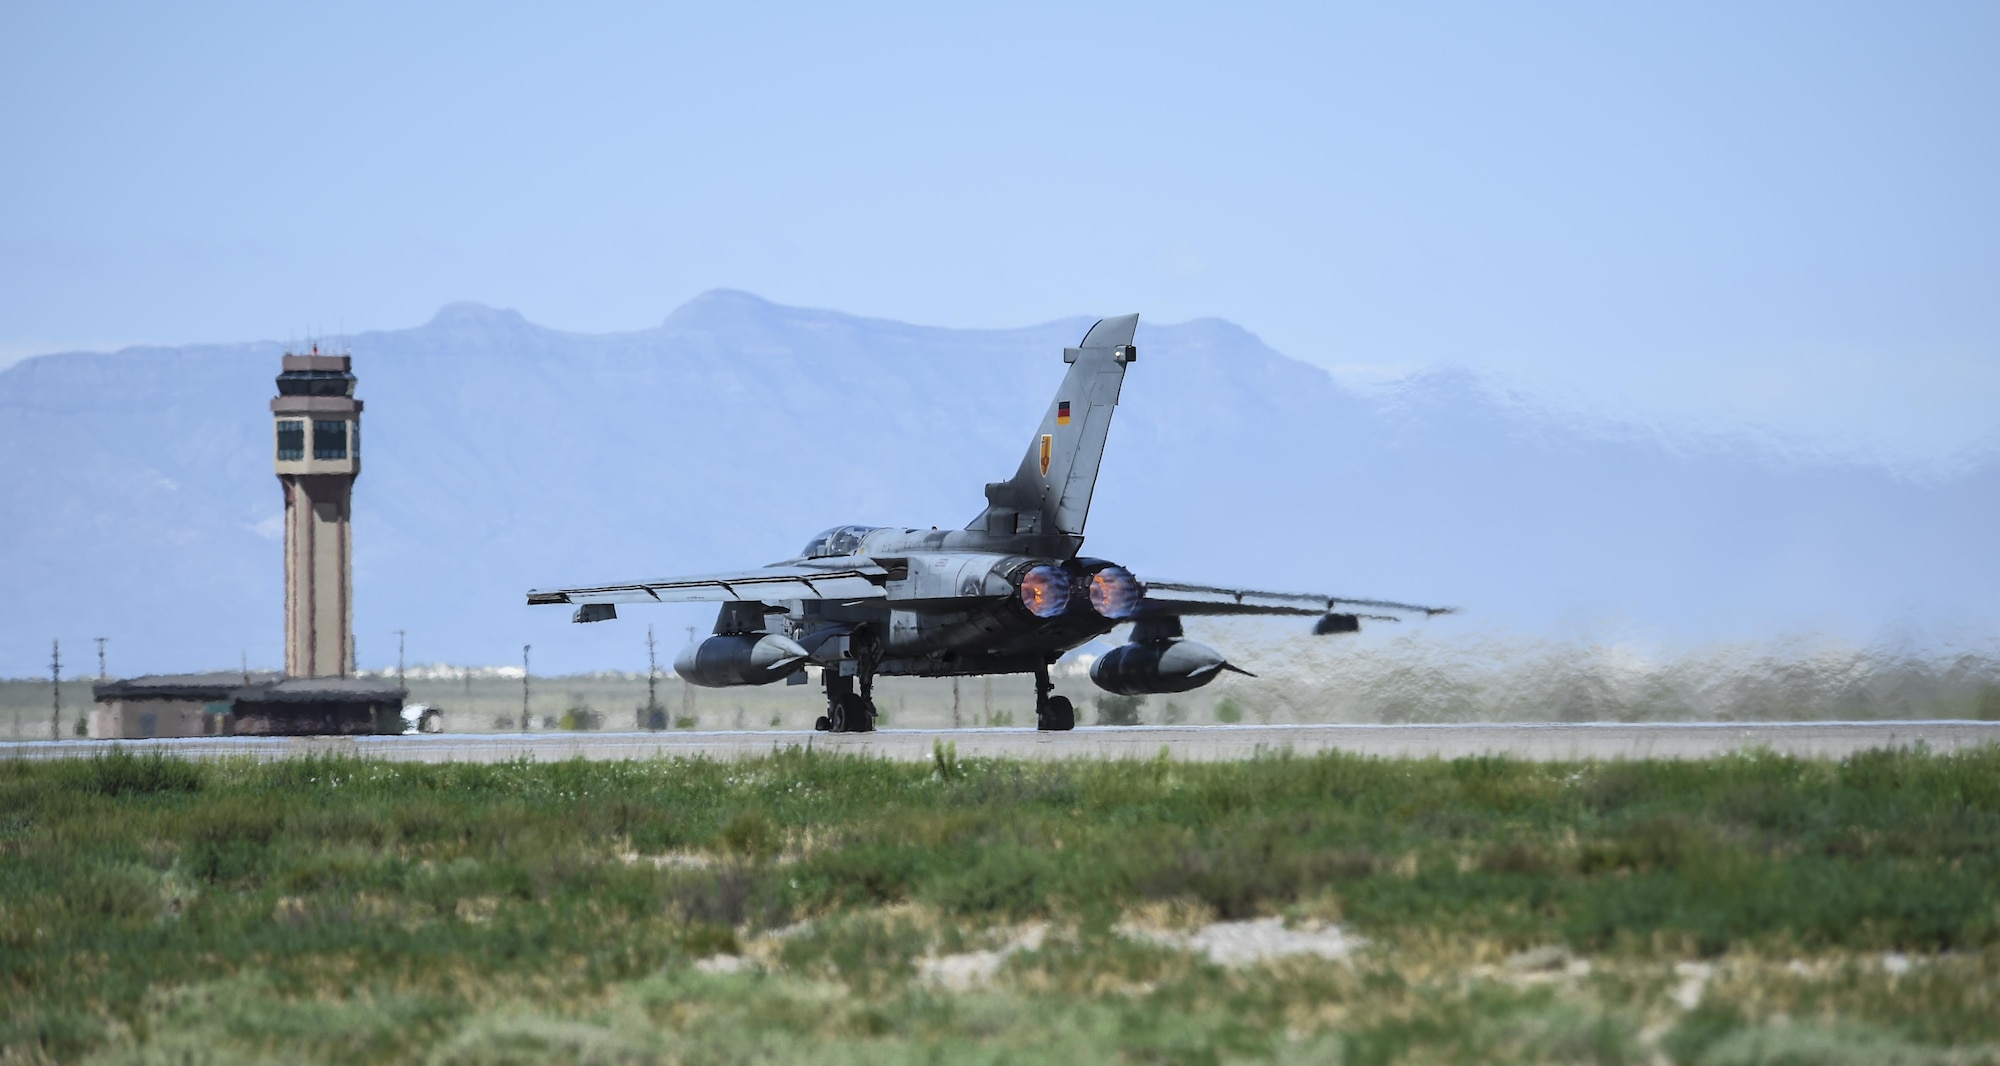 A German air force Tornado aircraft and an F-16 Fighting Falcon perform a final joint flying mission at Holloman Air Force Base, N.M., Aug. 17, 2017. The German air force has entered its final stage of departure, however they are not expected to complete their departure from Holloman AFB until mid 2019. (U.S. Air Force photo by Staff Sgt. Stacy Jonsgaard)